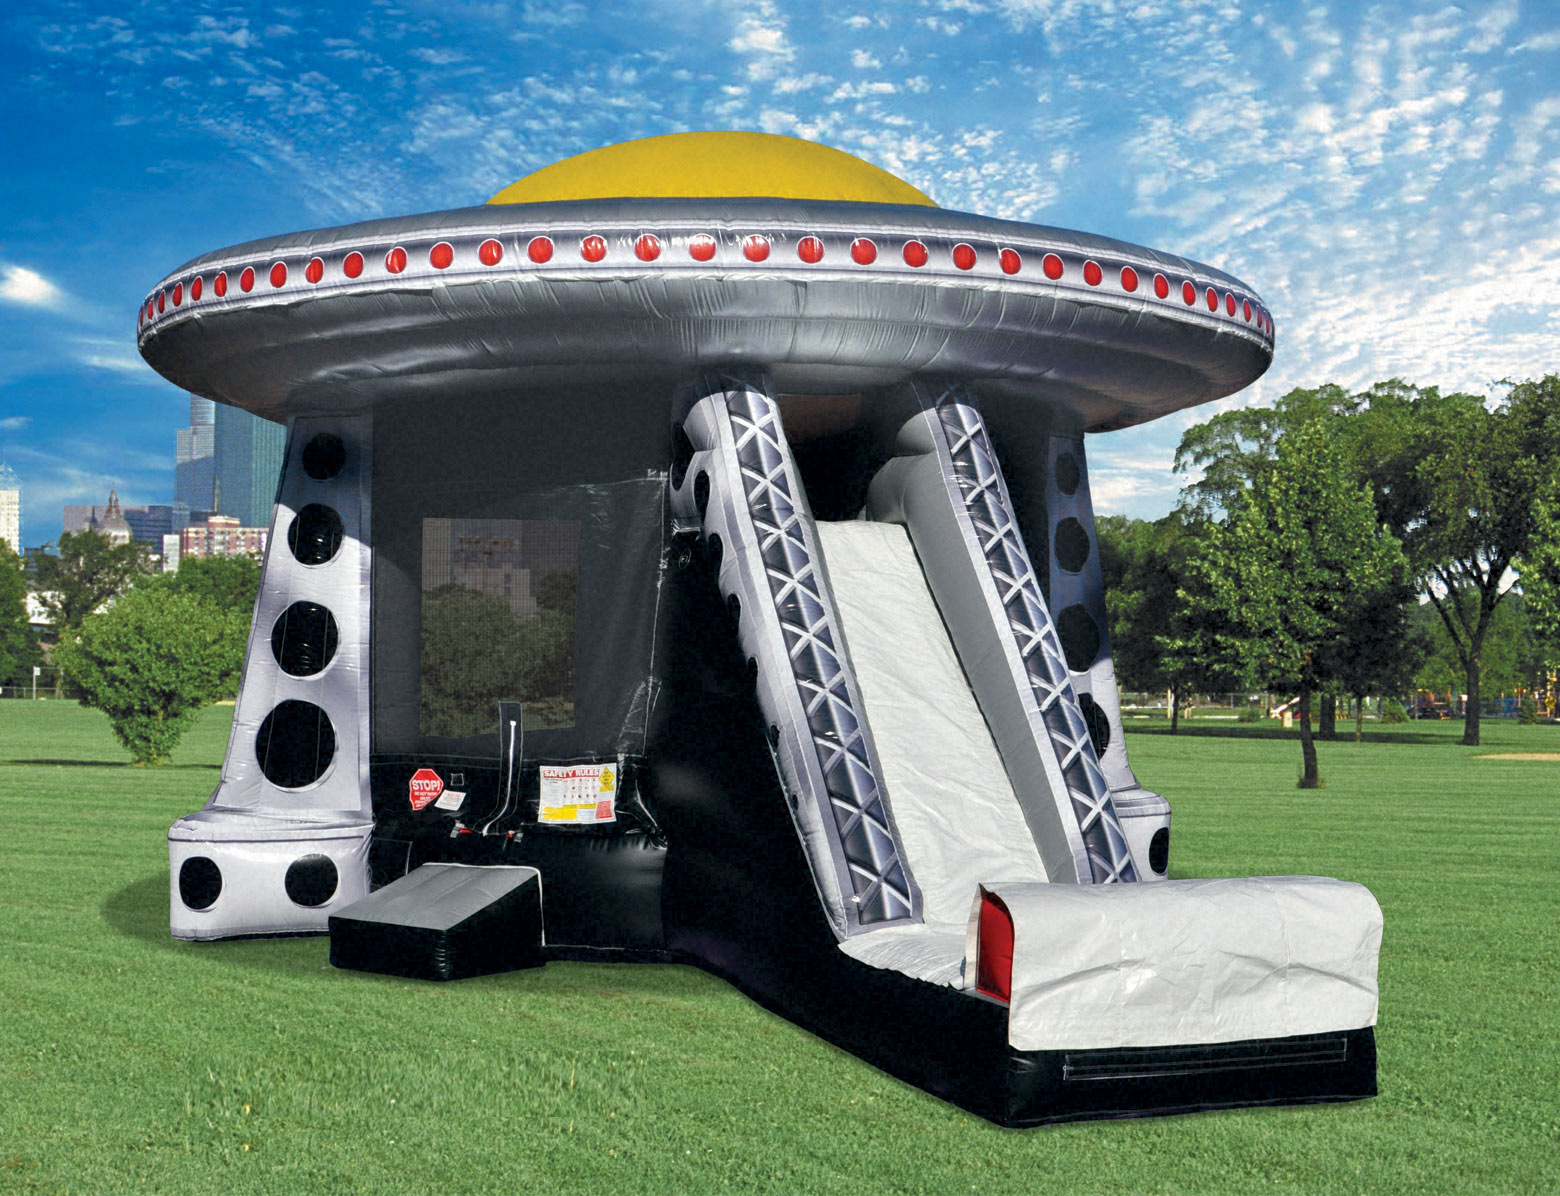 UFO space ship inflatable party rentals in Houston, TX & surrounding cities